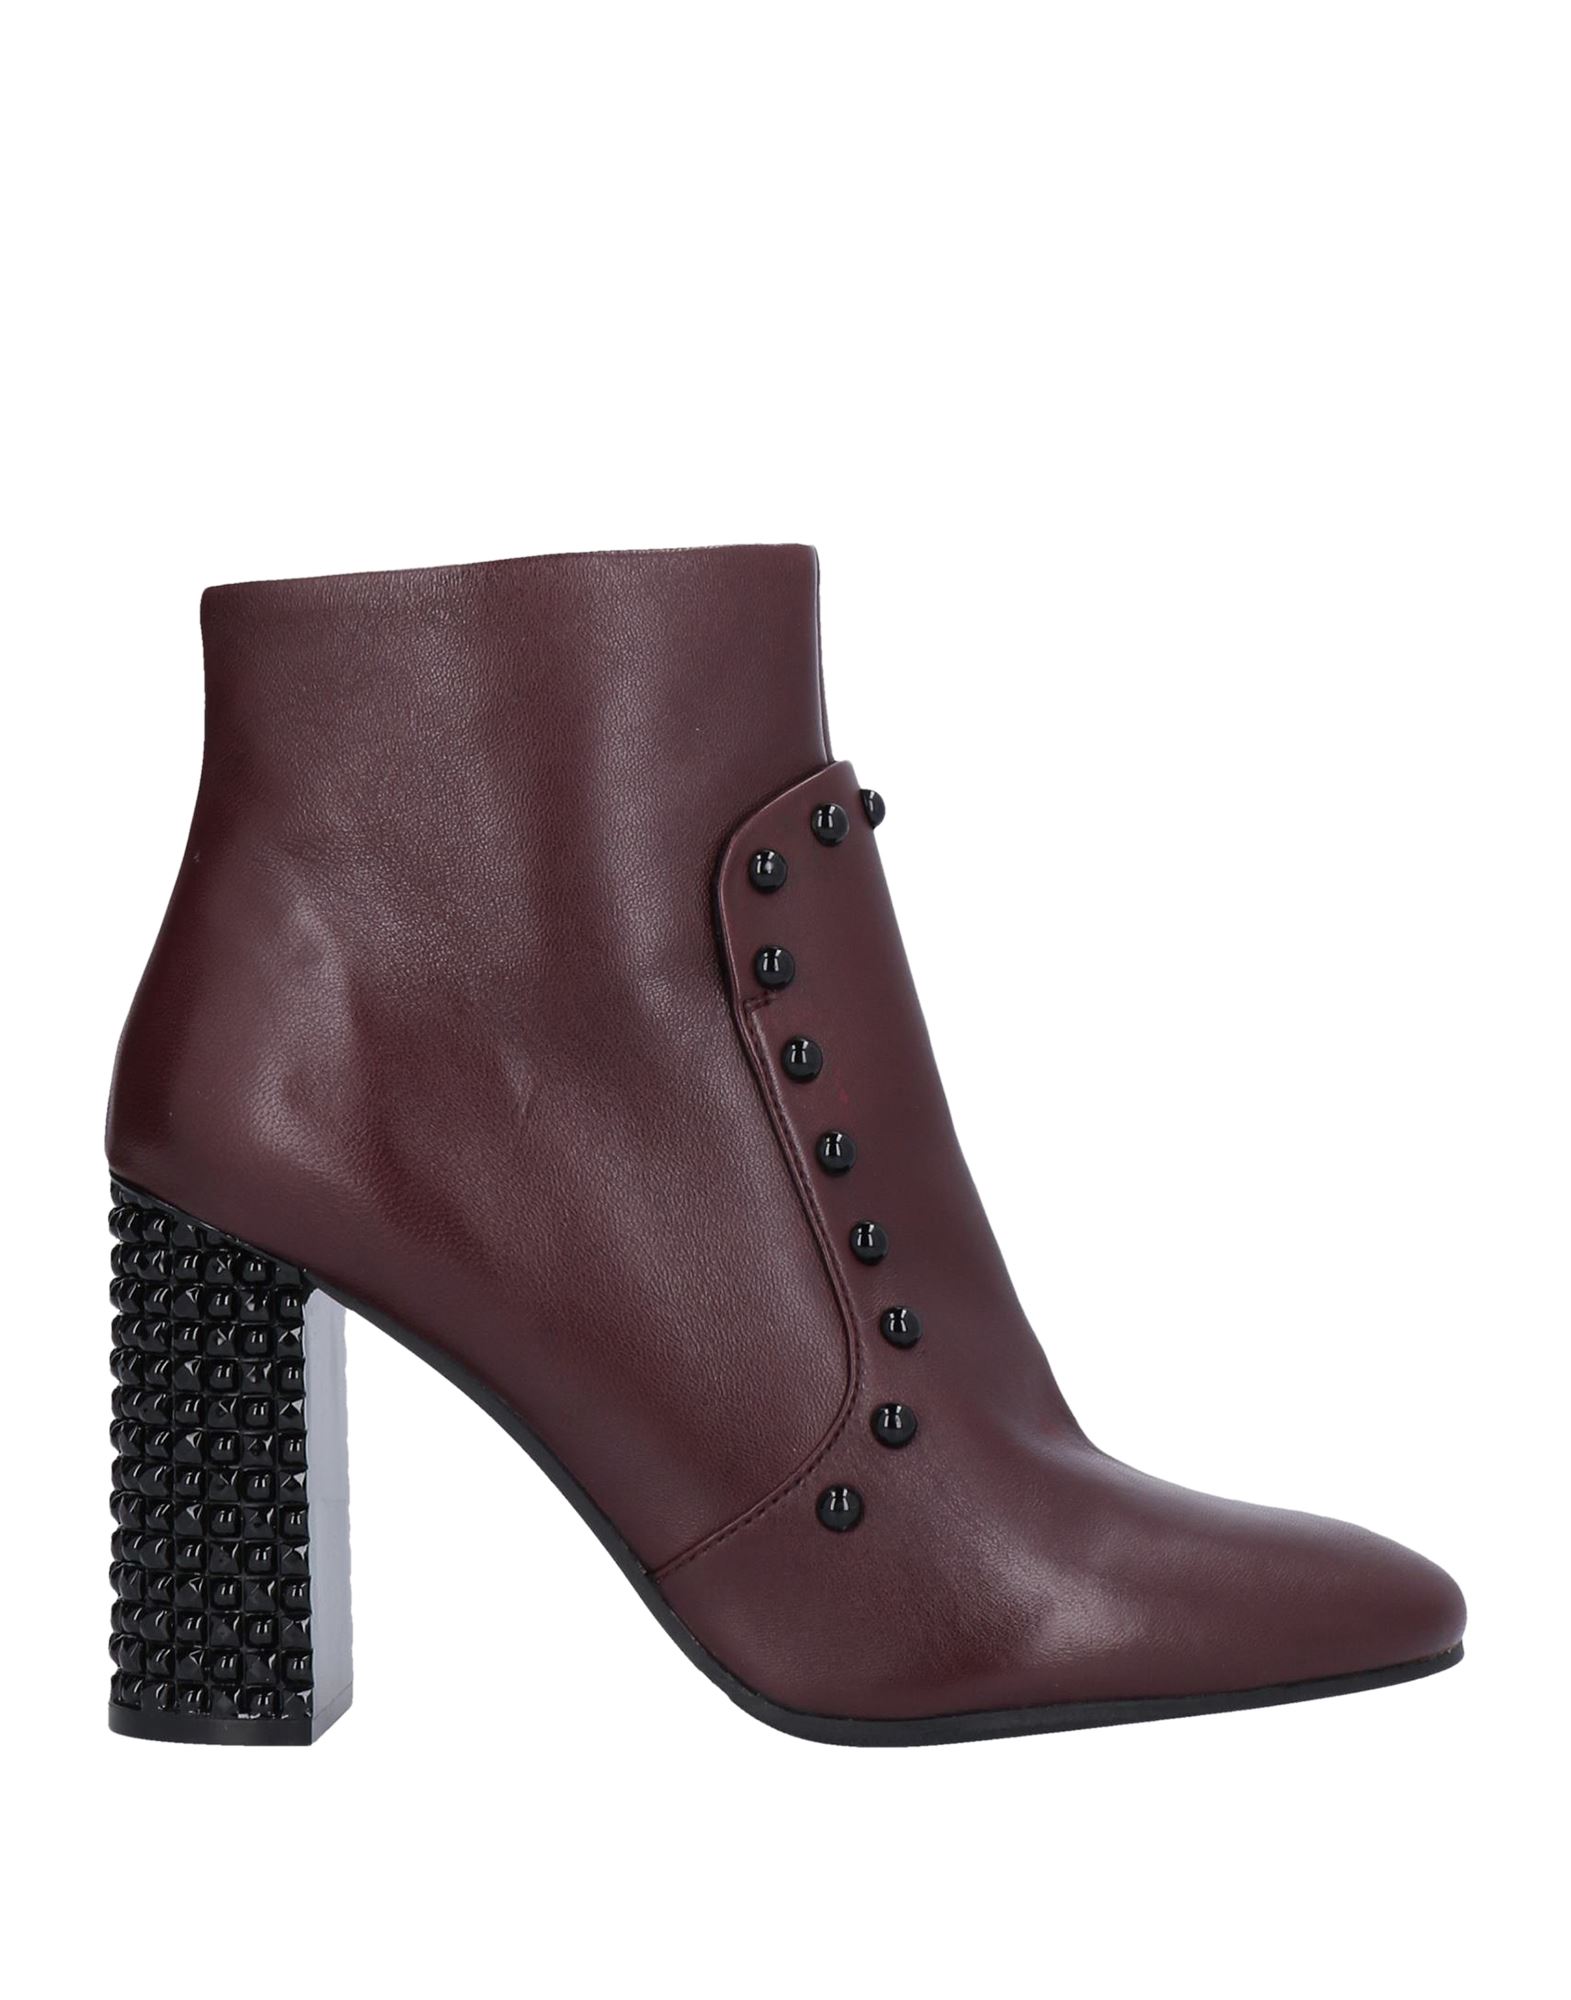 Adele Dezotti Ankle Boots In Maroon